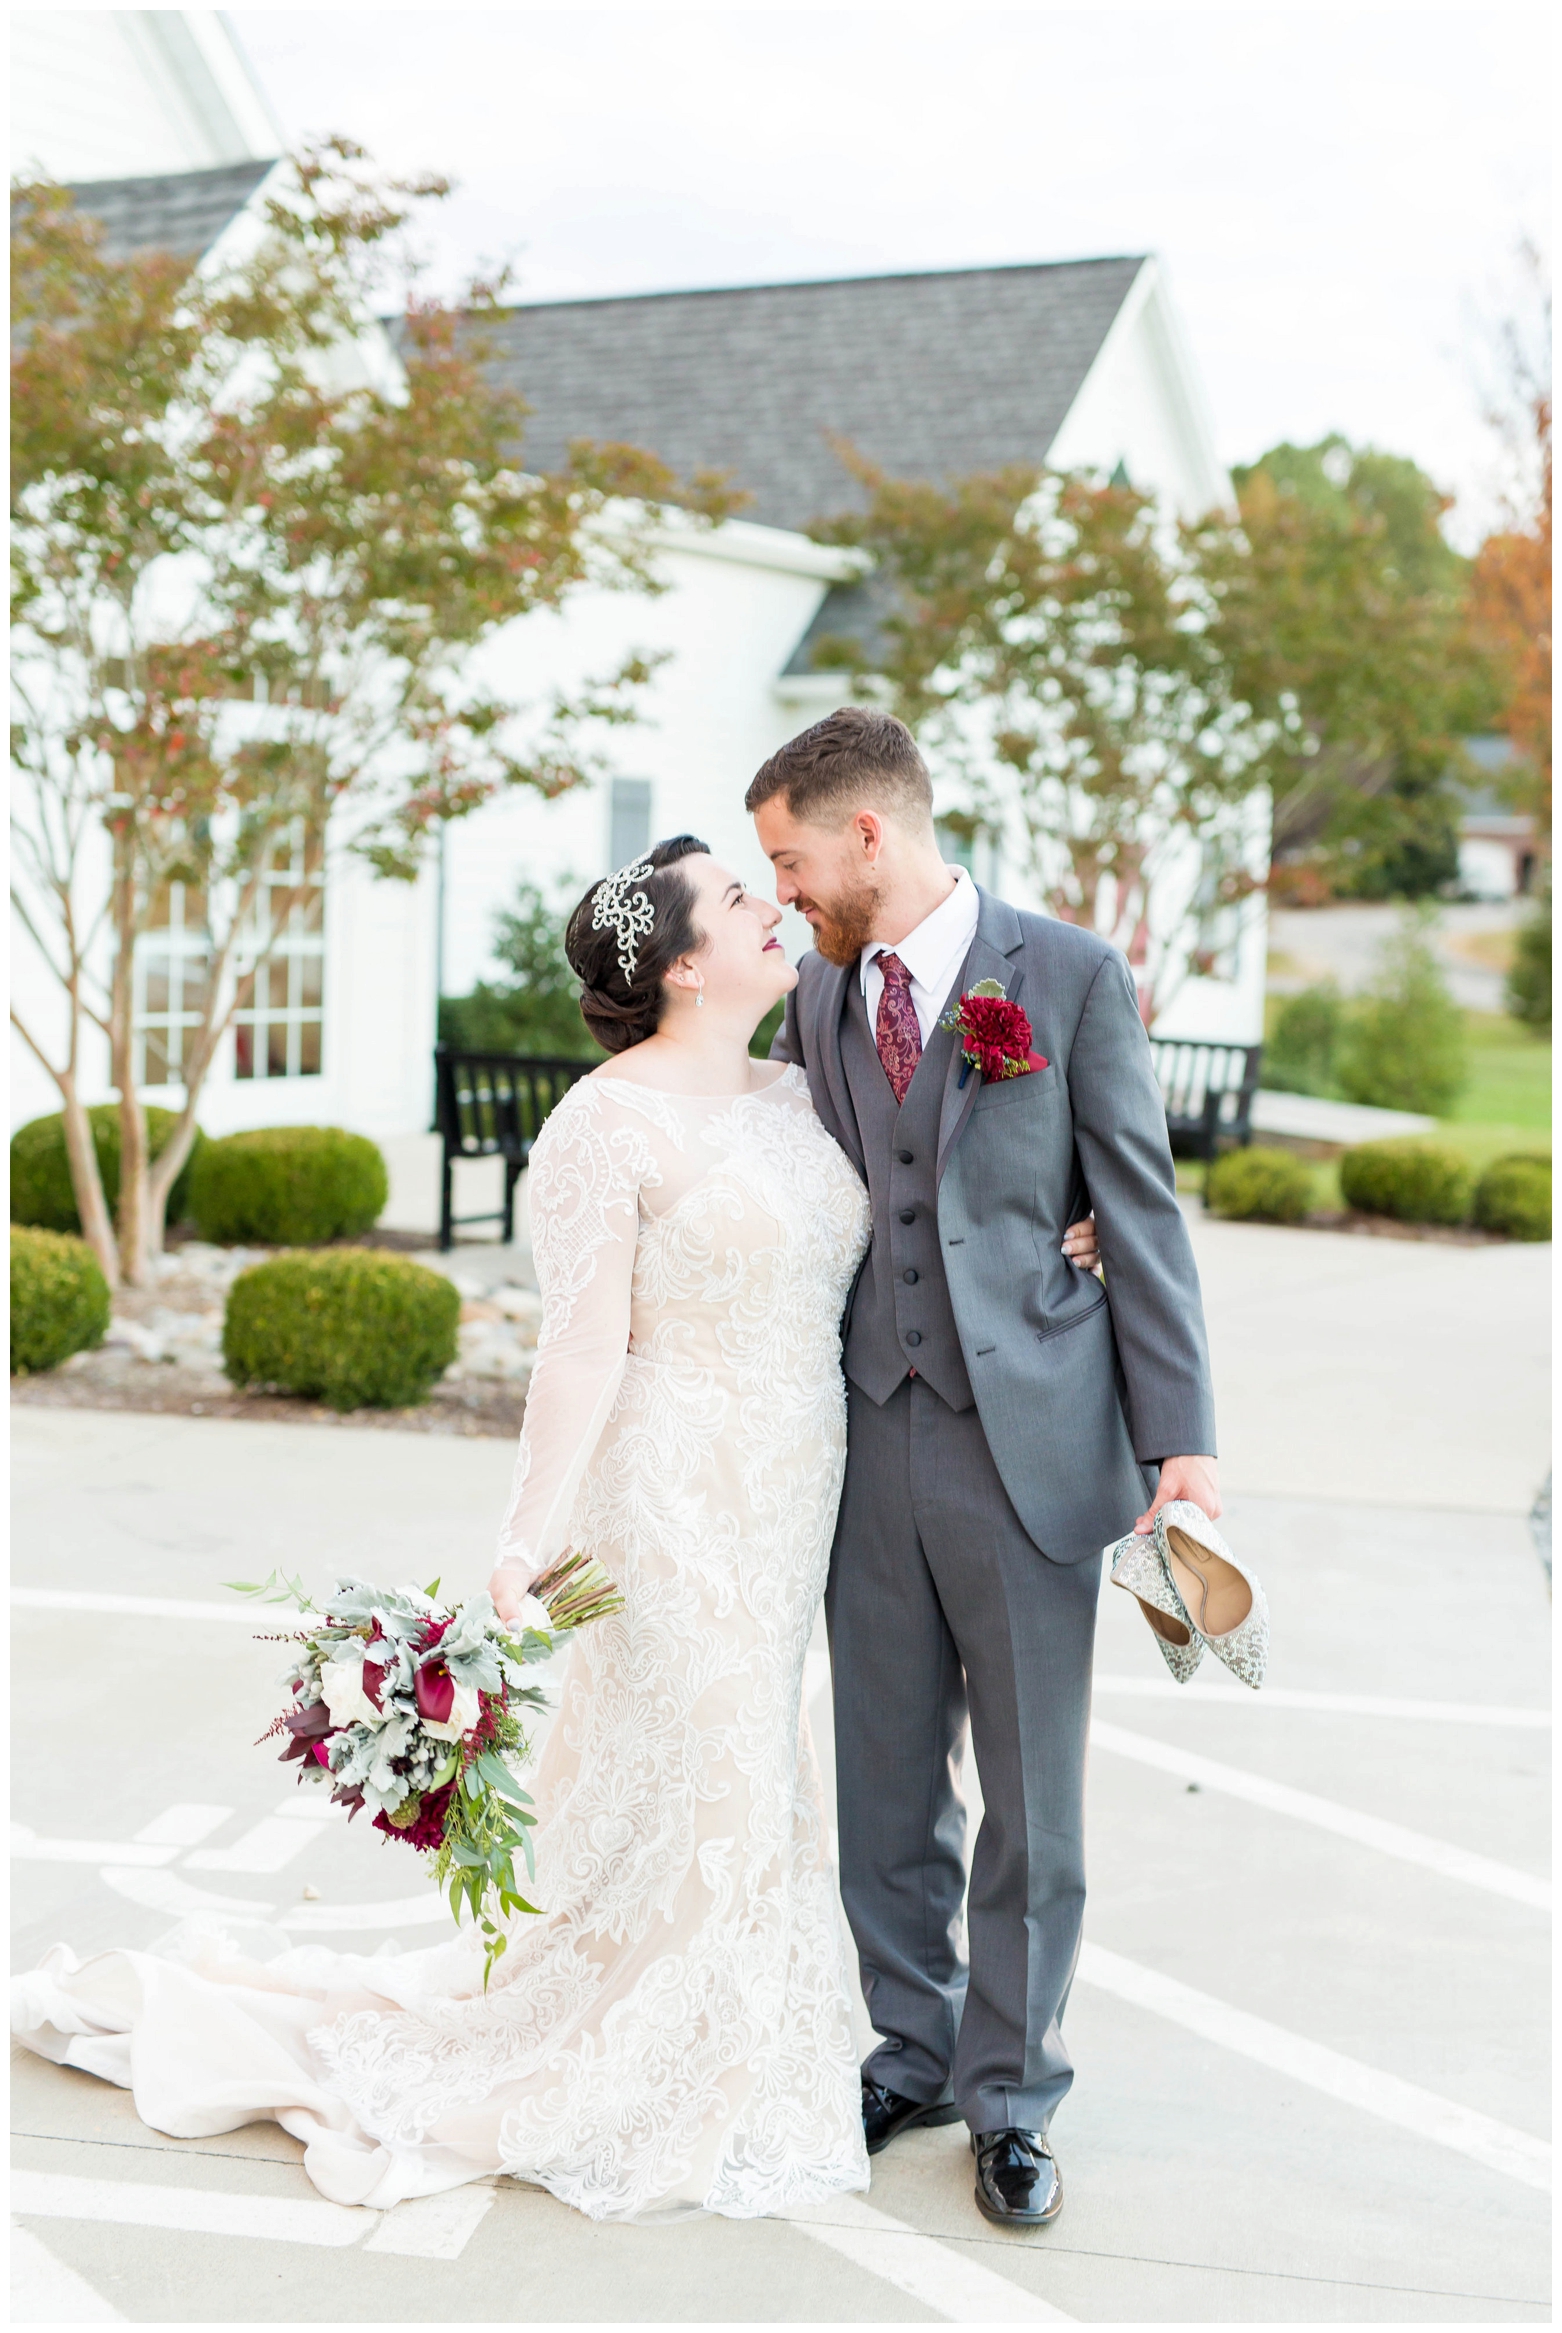 View More: http://hopetaylorphotographyphotos.pass.us/allysa-and-nathan